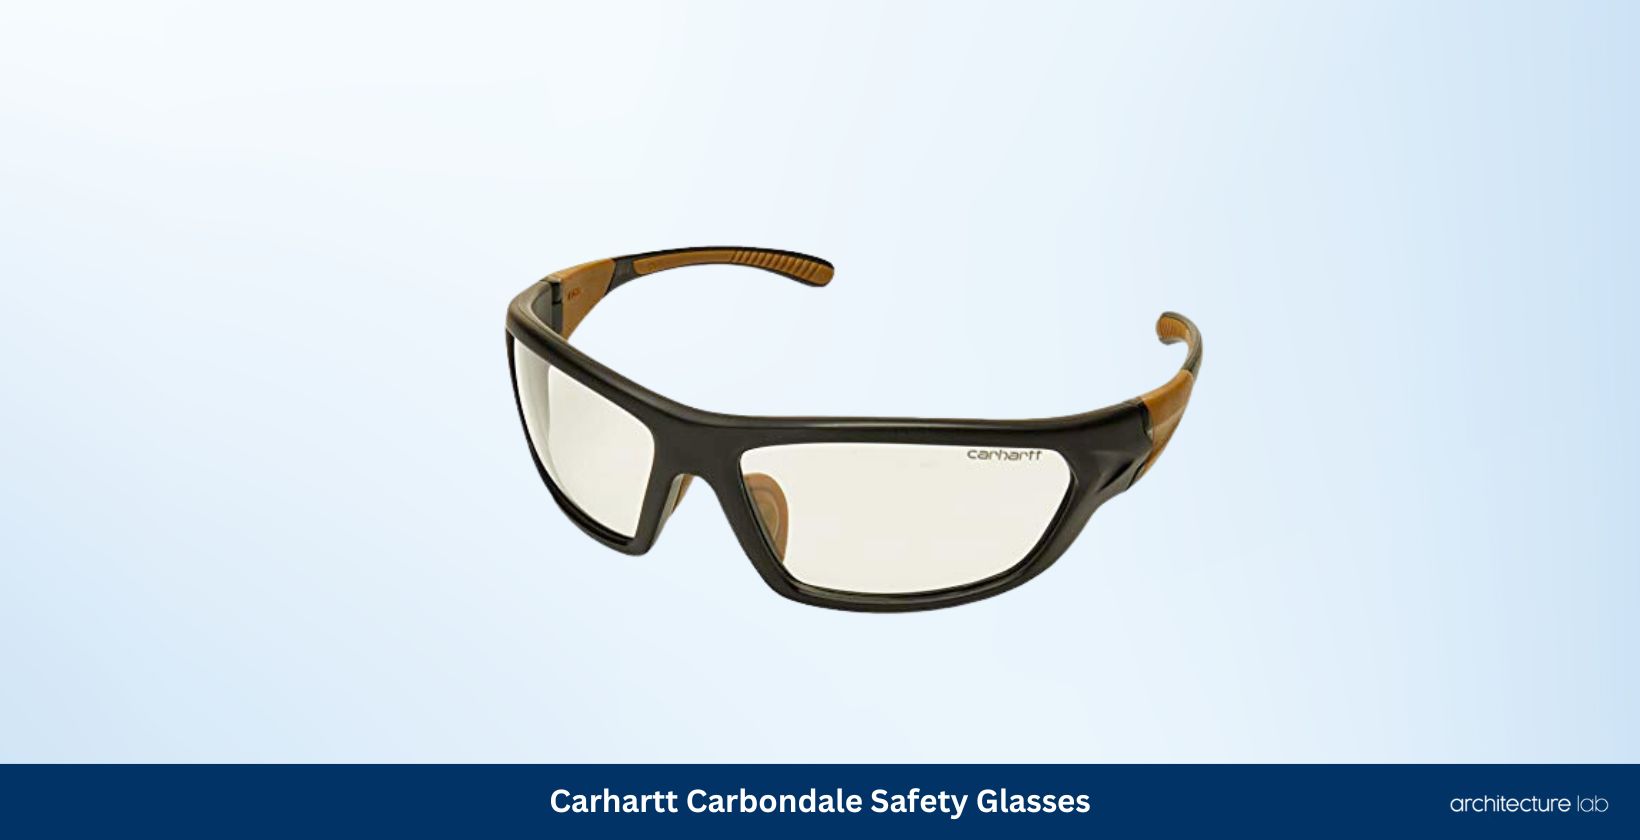 Carhartt carbondale safety glasses with clear anti fog lens